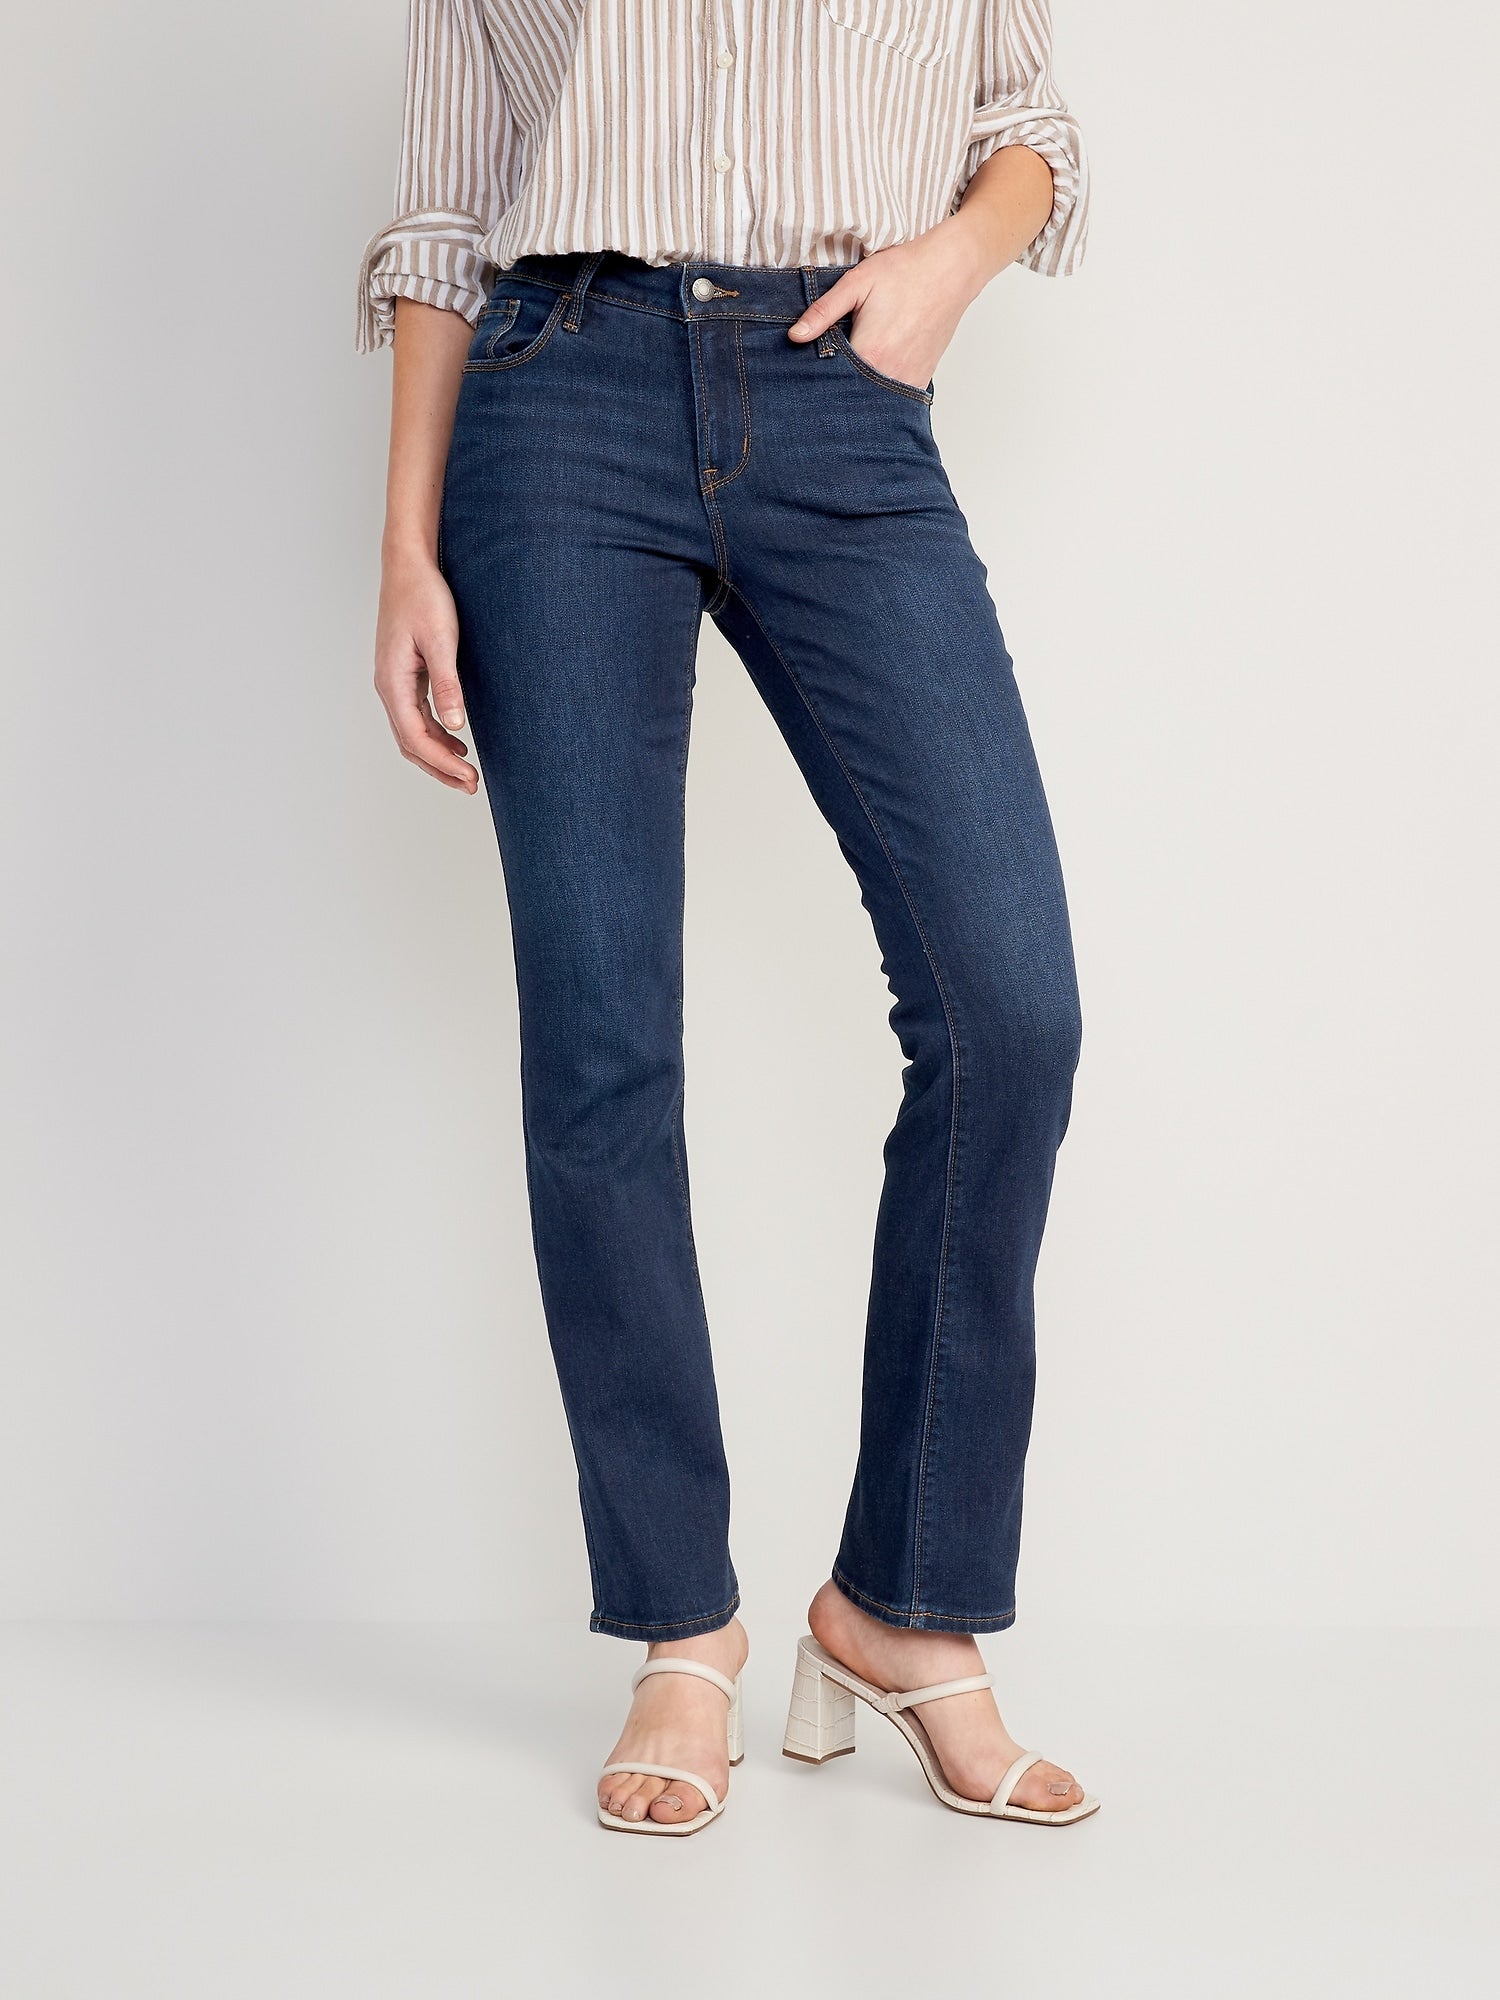 Old Navy Mid-Rise Kicker Boot-Cut Jeans for Women – Search By Inseam